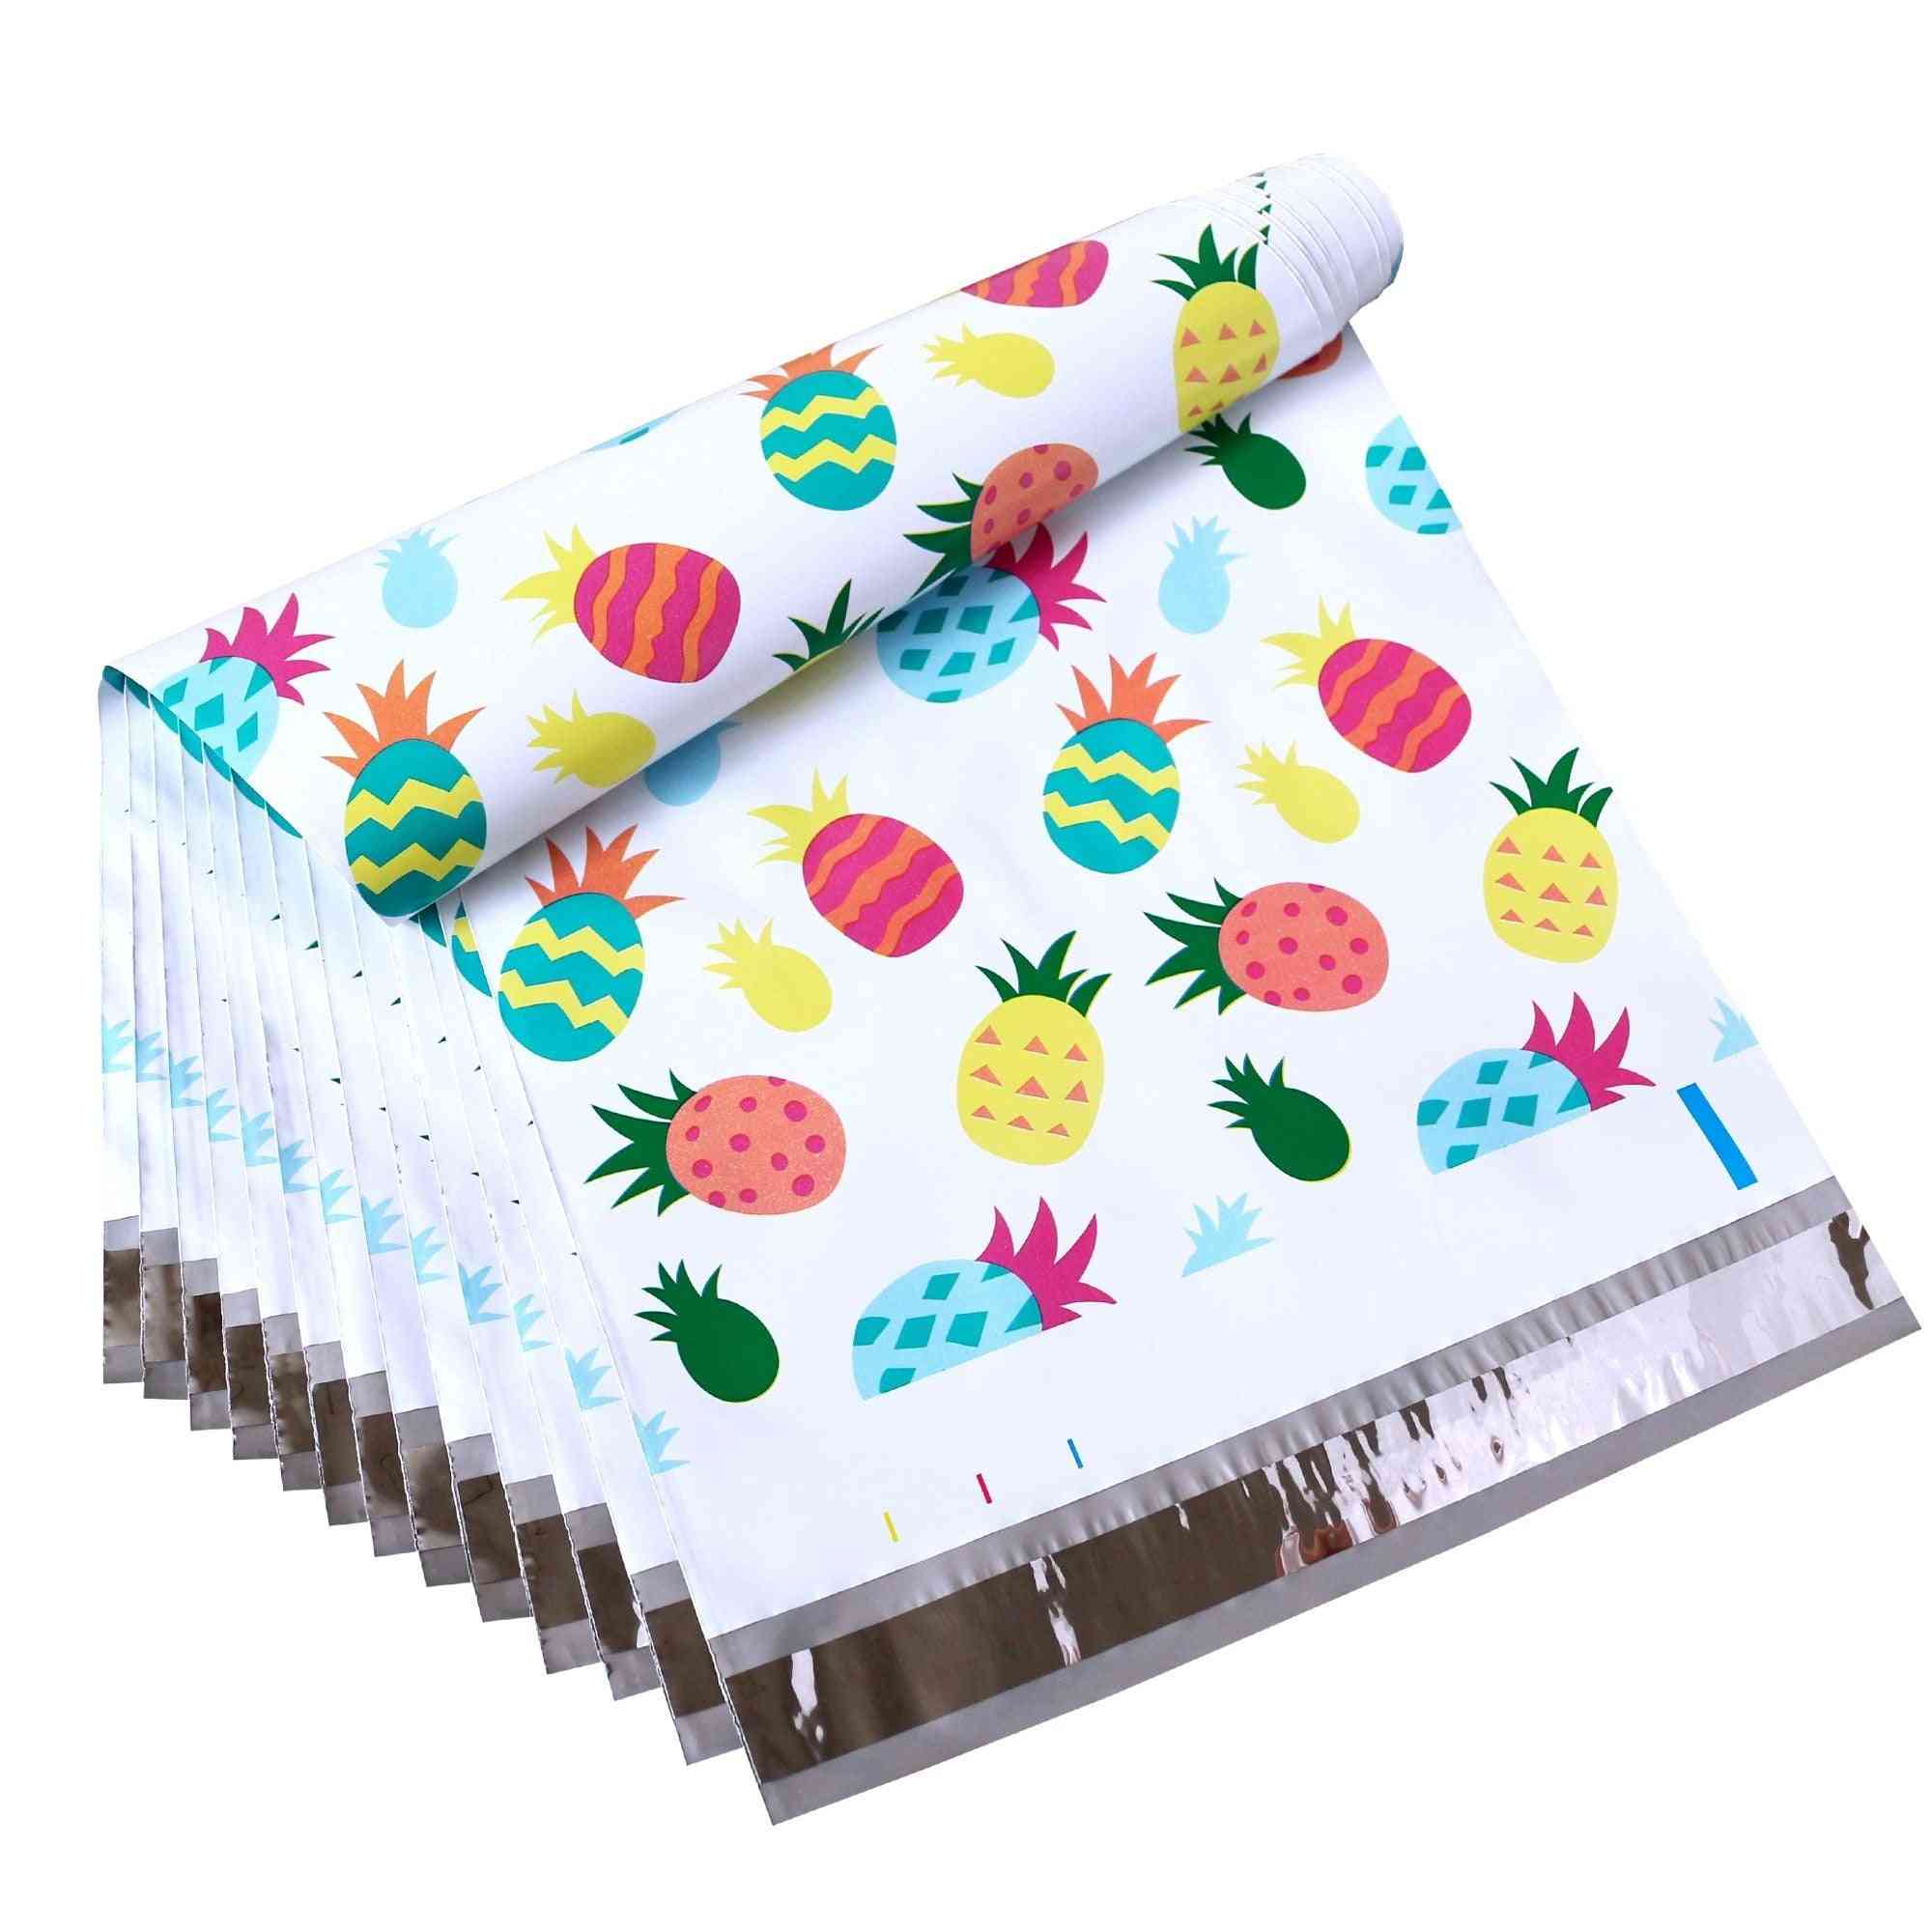 Colorful Poly Mailer, Creative Printing, Self Seal Plastic Packing, Envelope Bags